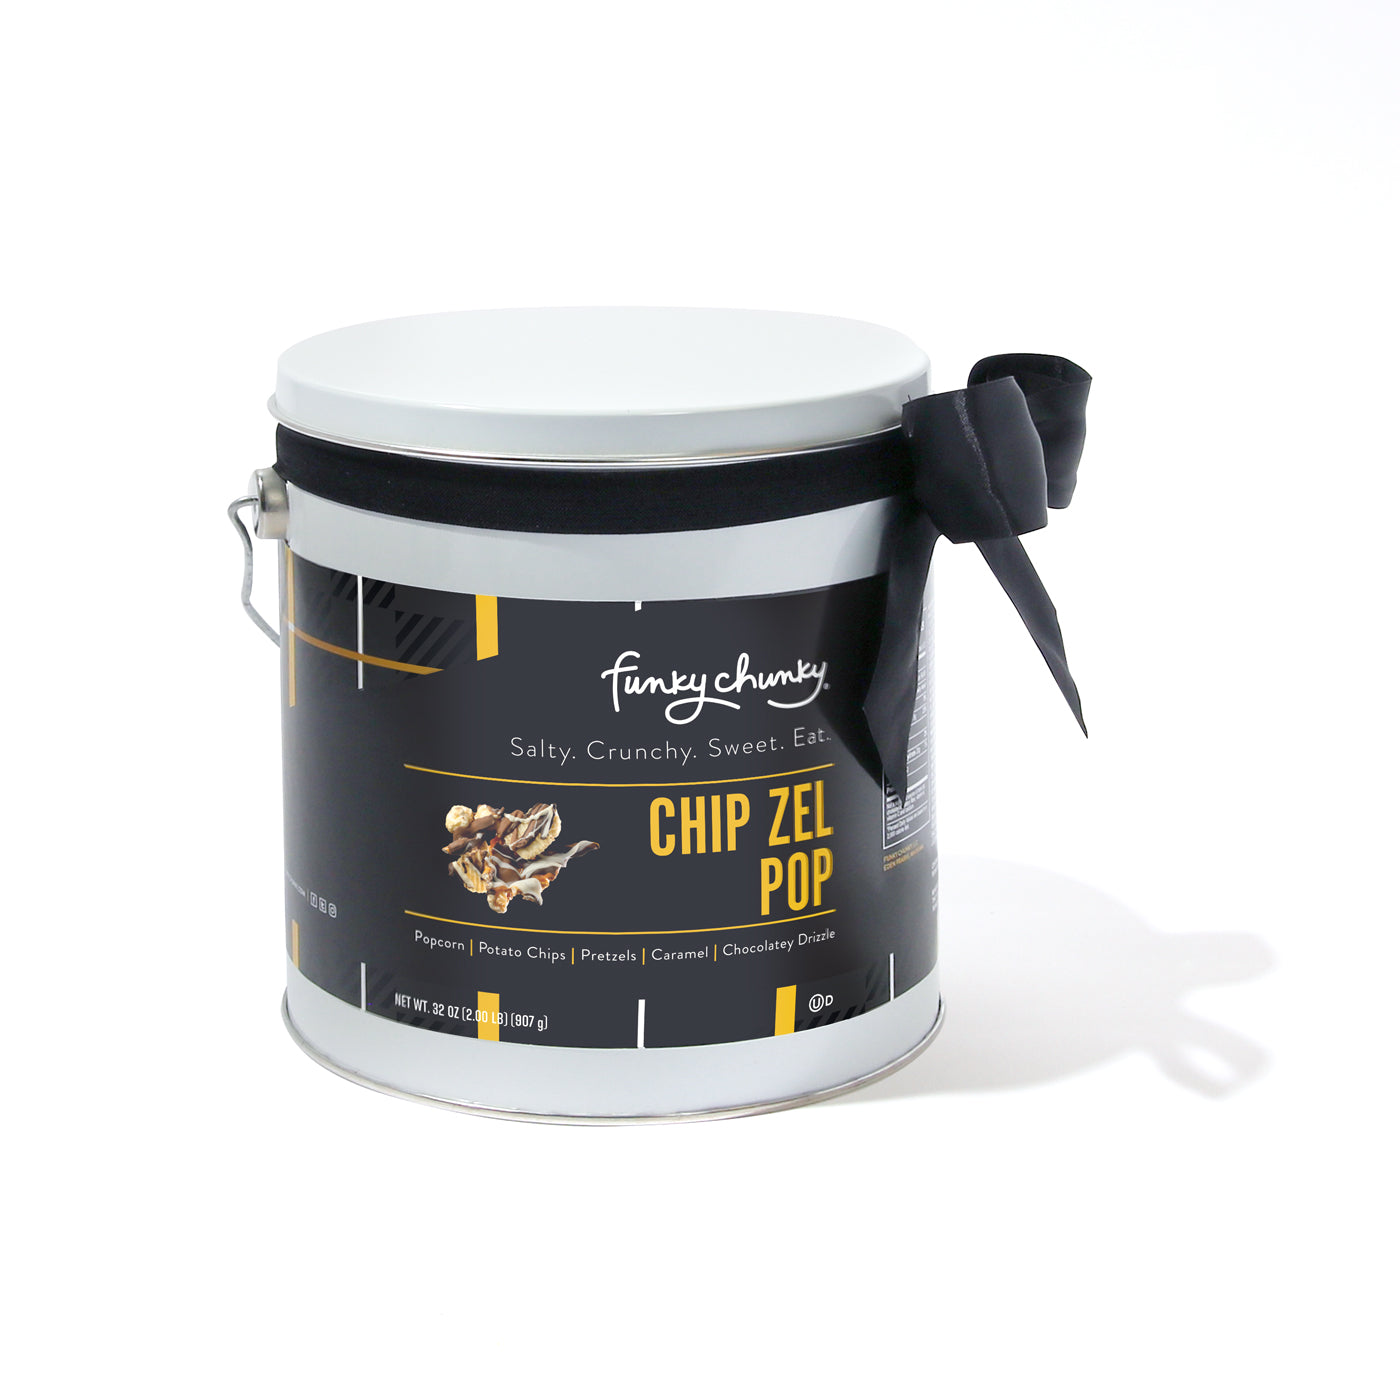 Gift Pails 2 lb-This gourmet popcorn gift tin is filled to the lid with two rich and delicious pounds of your favorite Funky Chunky¬Æ flavor. This popcorn tin is the perfect sharing or gifting size for family gatherings, small office parties and corporate customers.-Funky Chunky